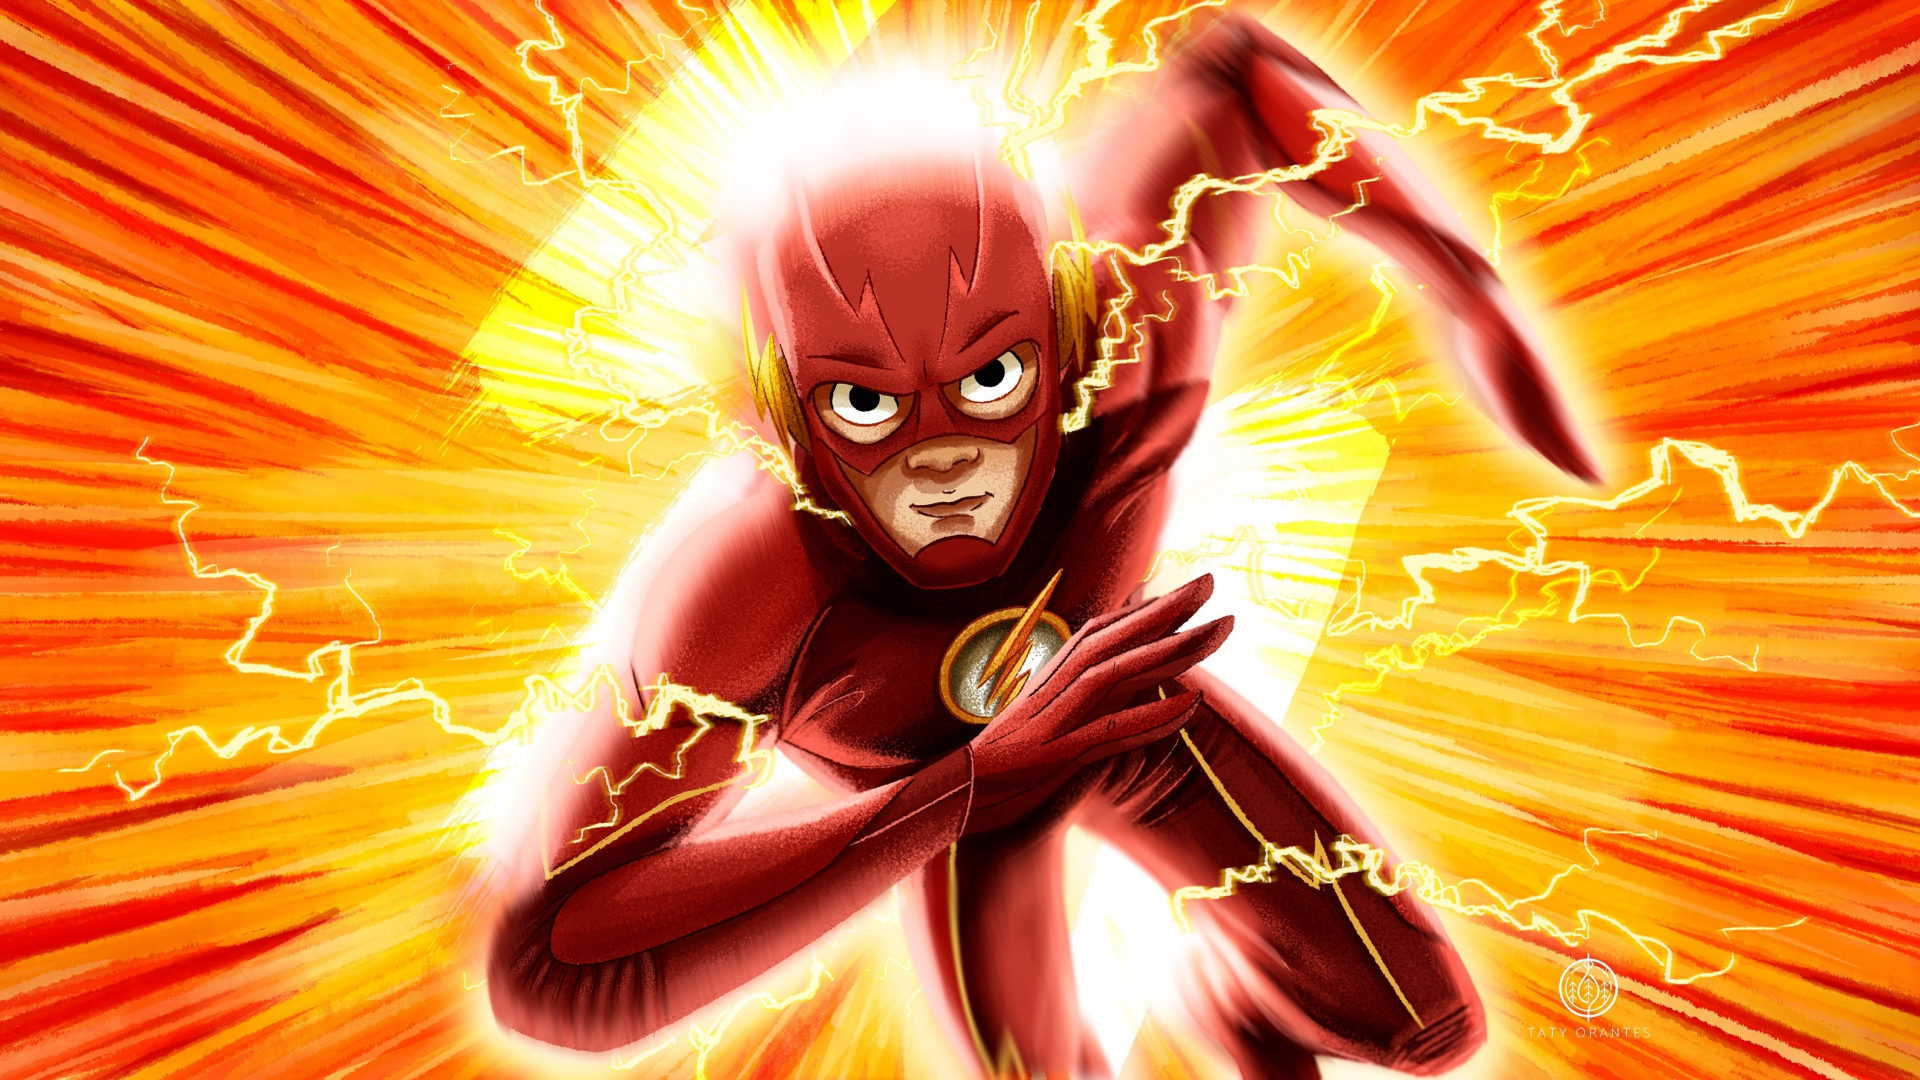 200+] The Flash Background s | Wallpapers.com